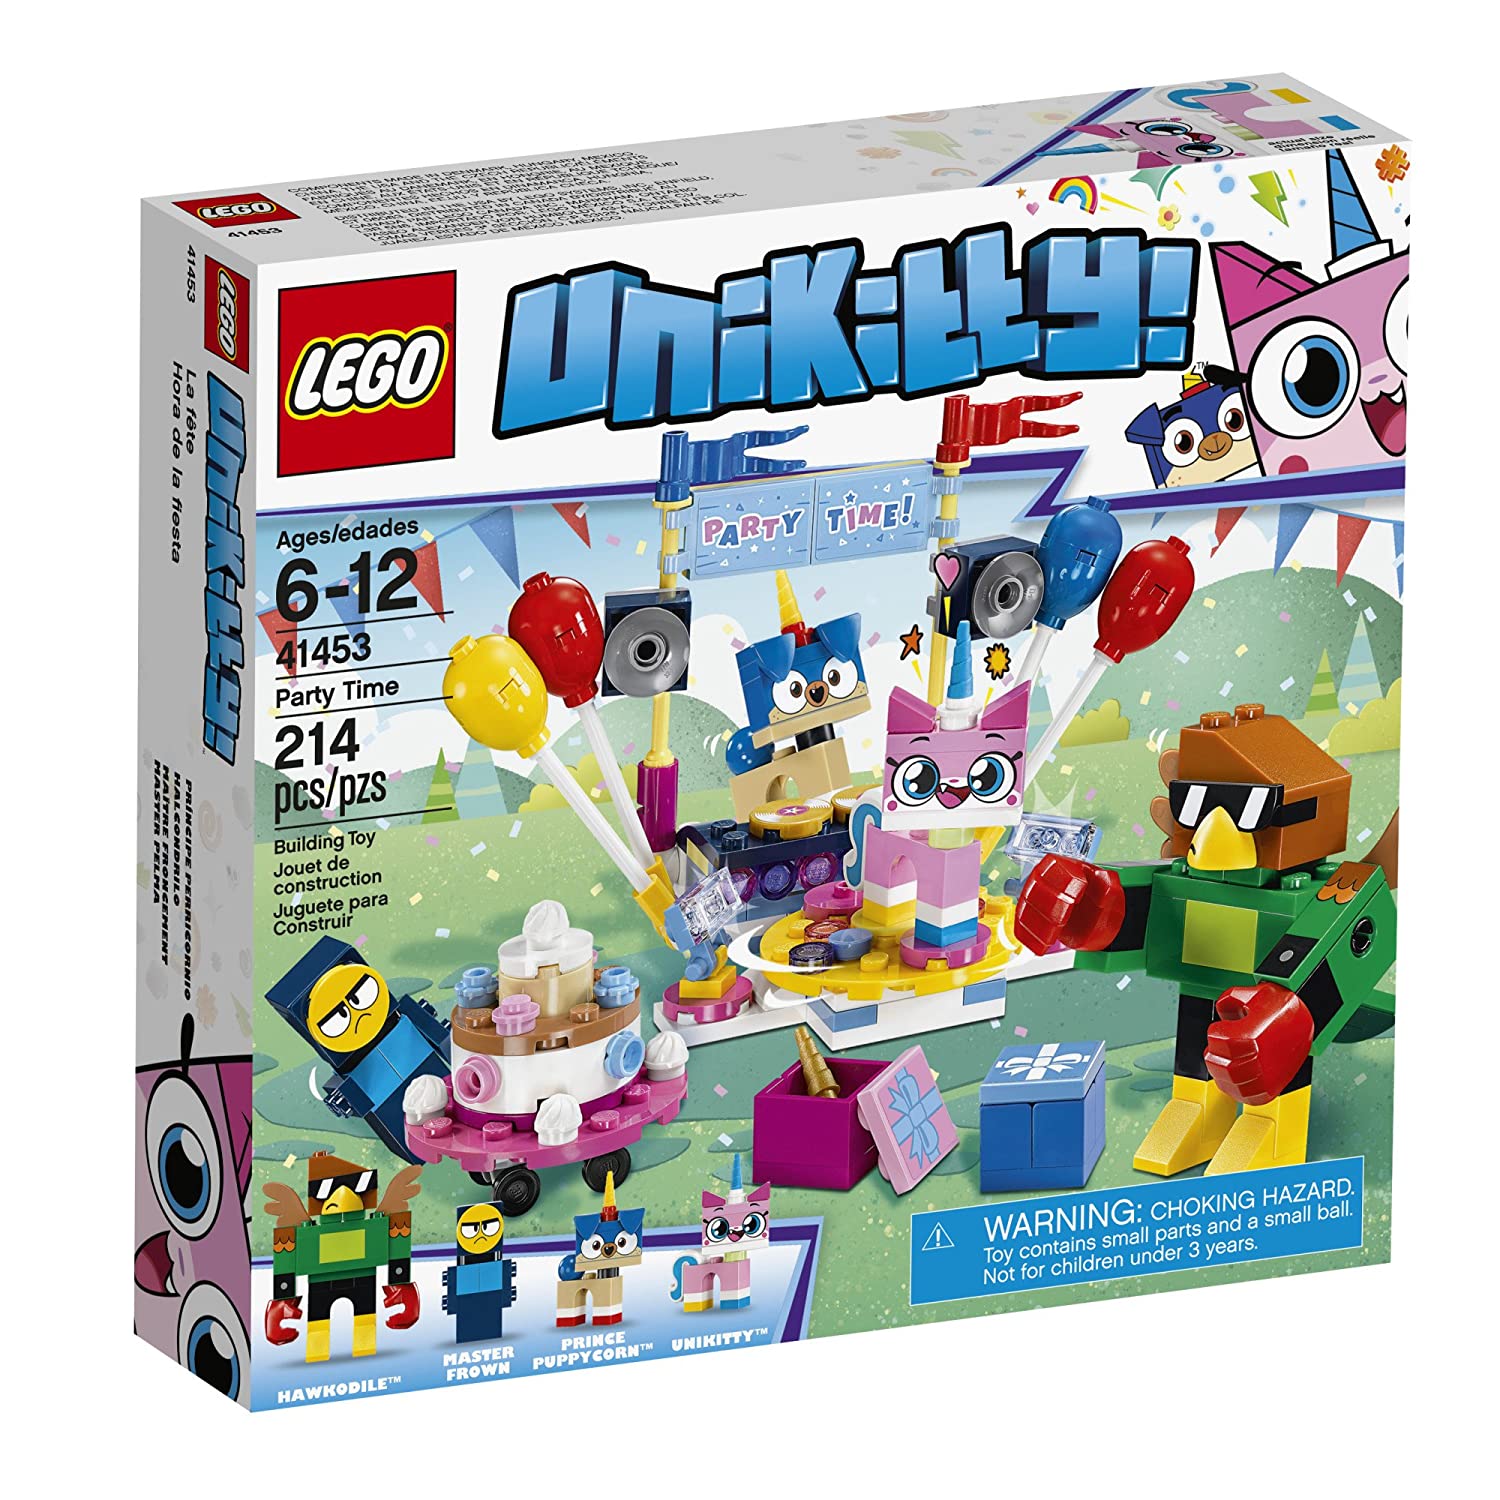 Top 7 Best LEGO Unikitty Sets Reviews in 2023 1